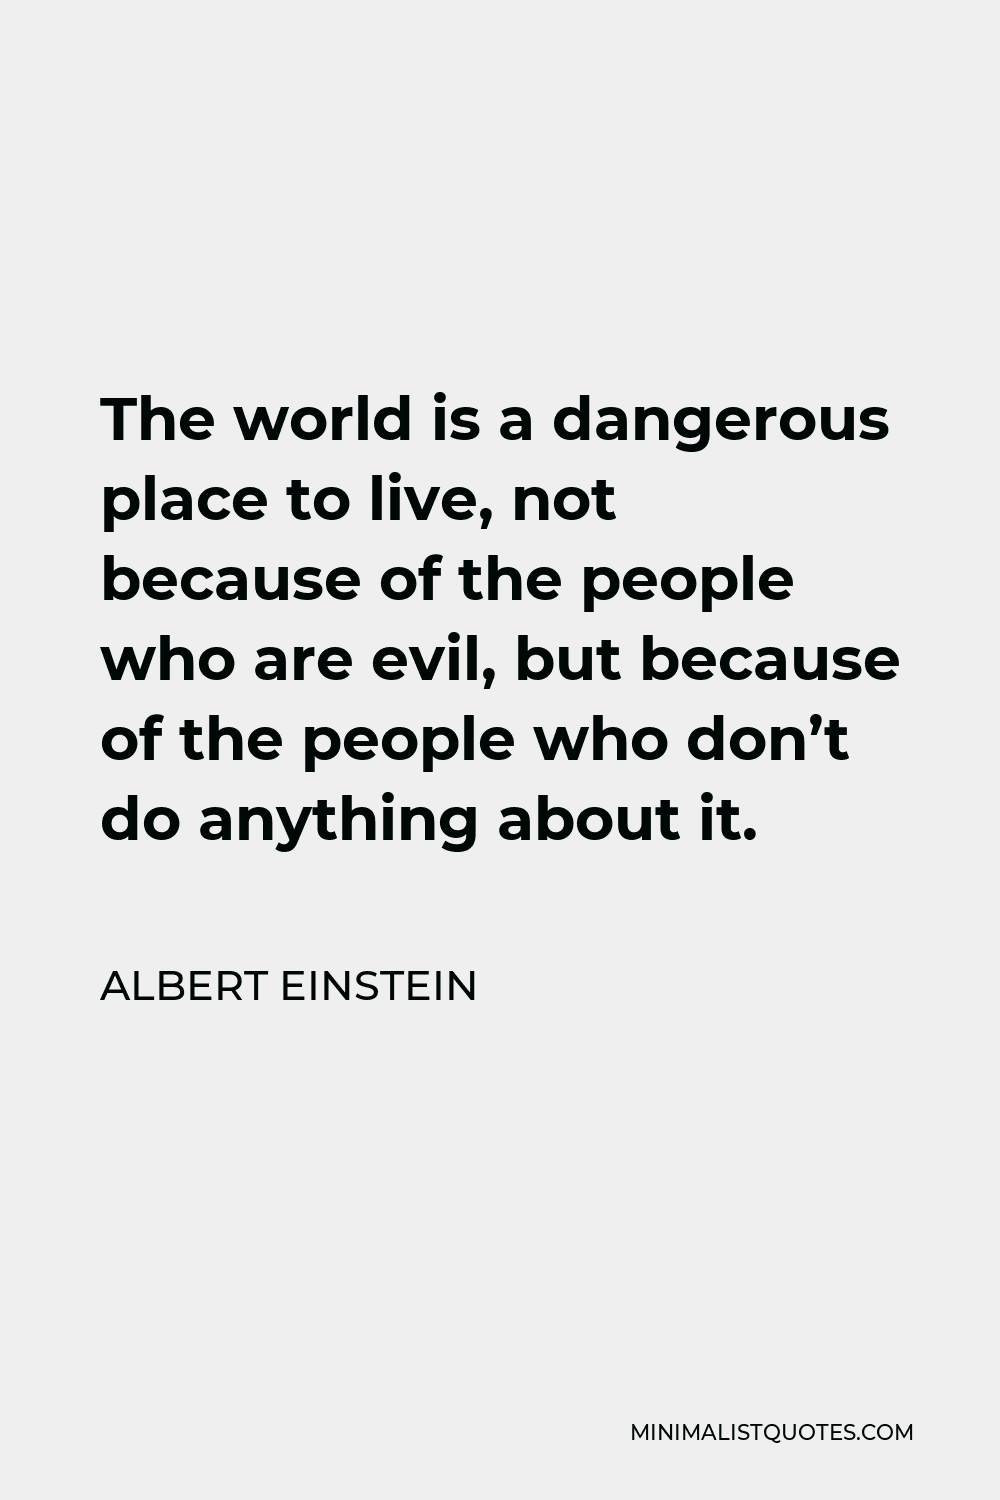 Albert Einstein Quote - The world is a dangerous place to live, not because of the people who are evil, but because of the people who don’t do anything about it.